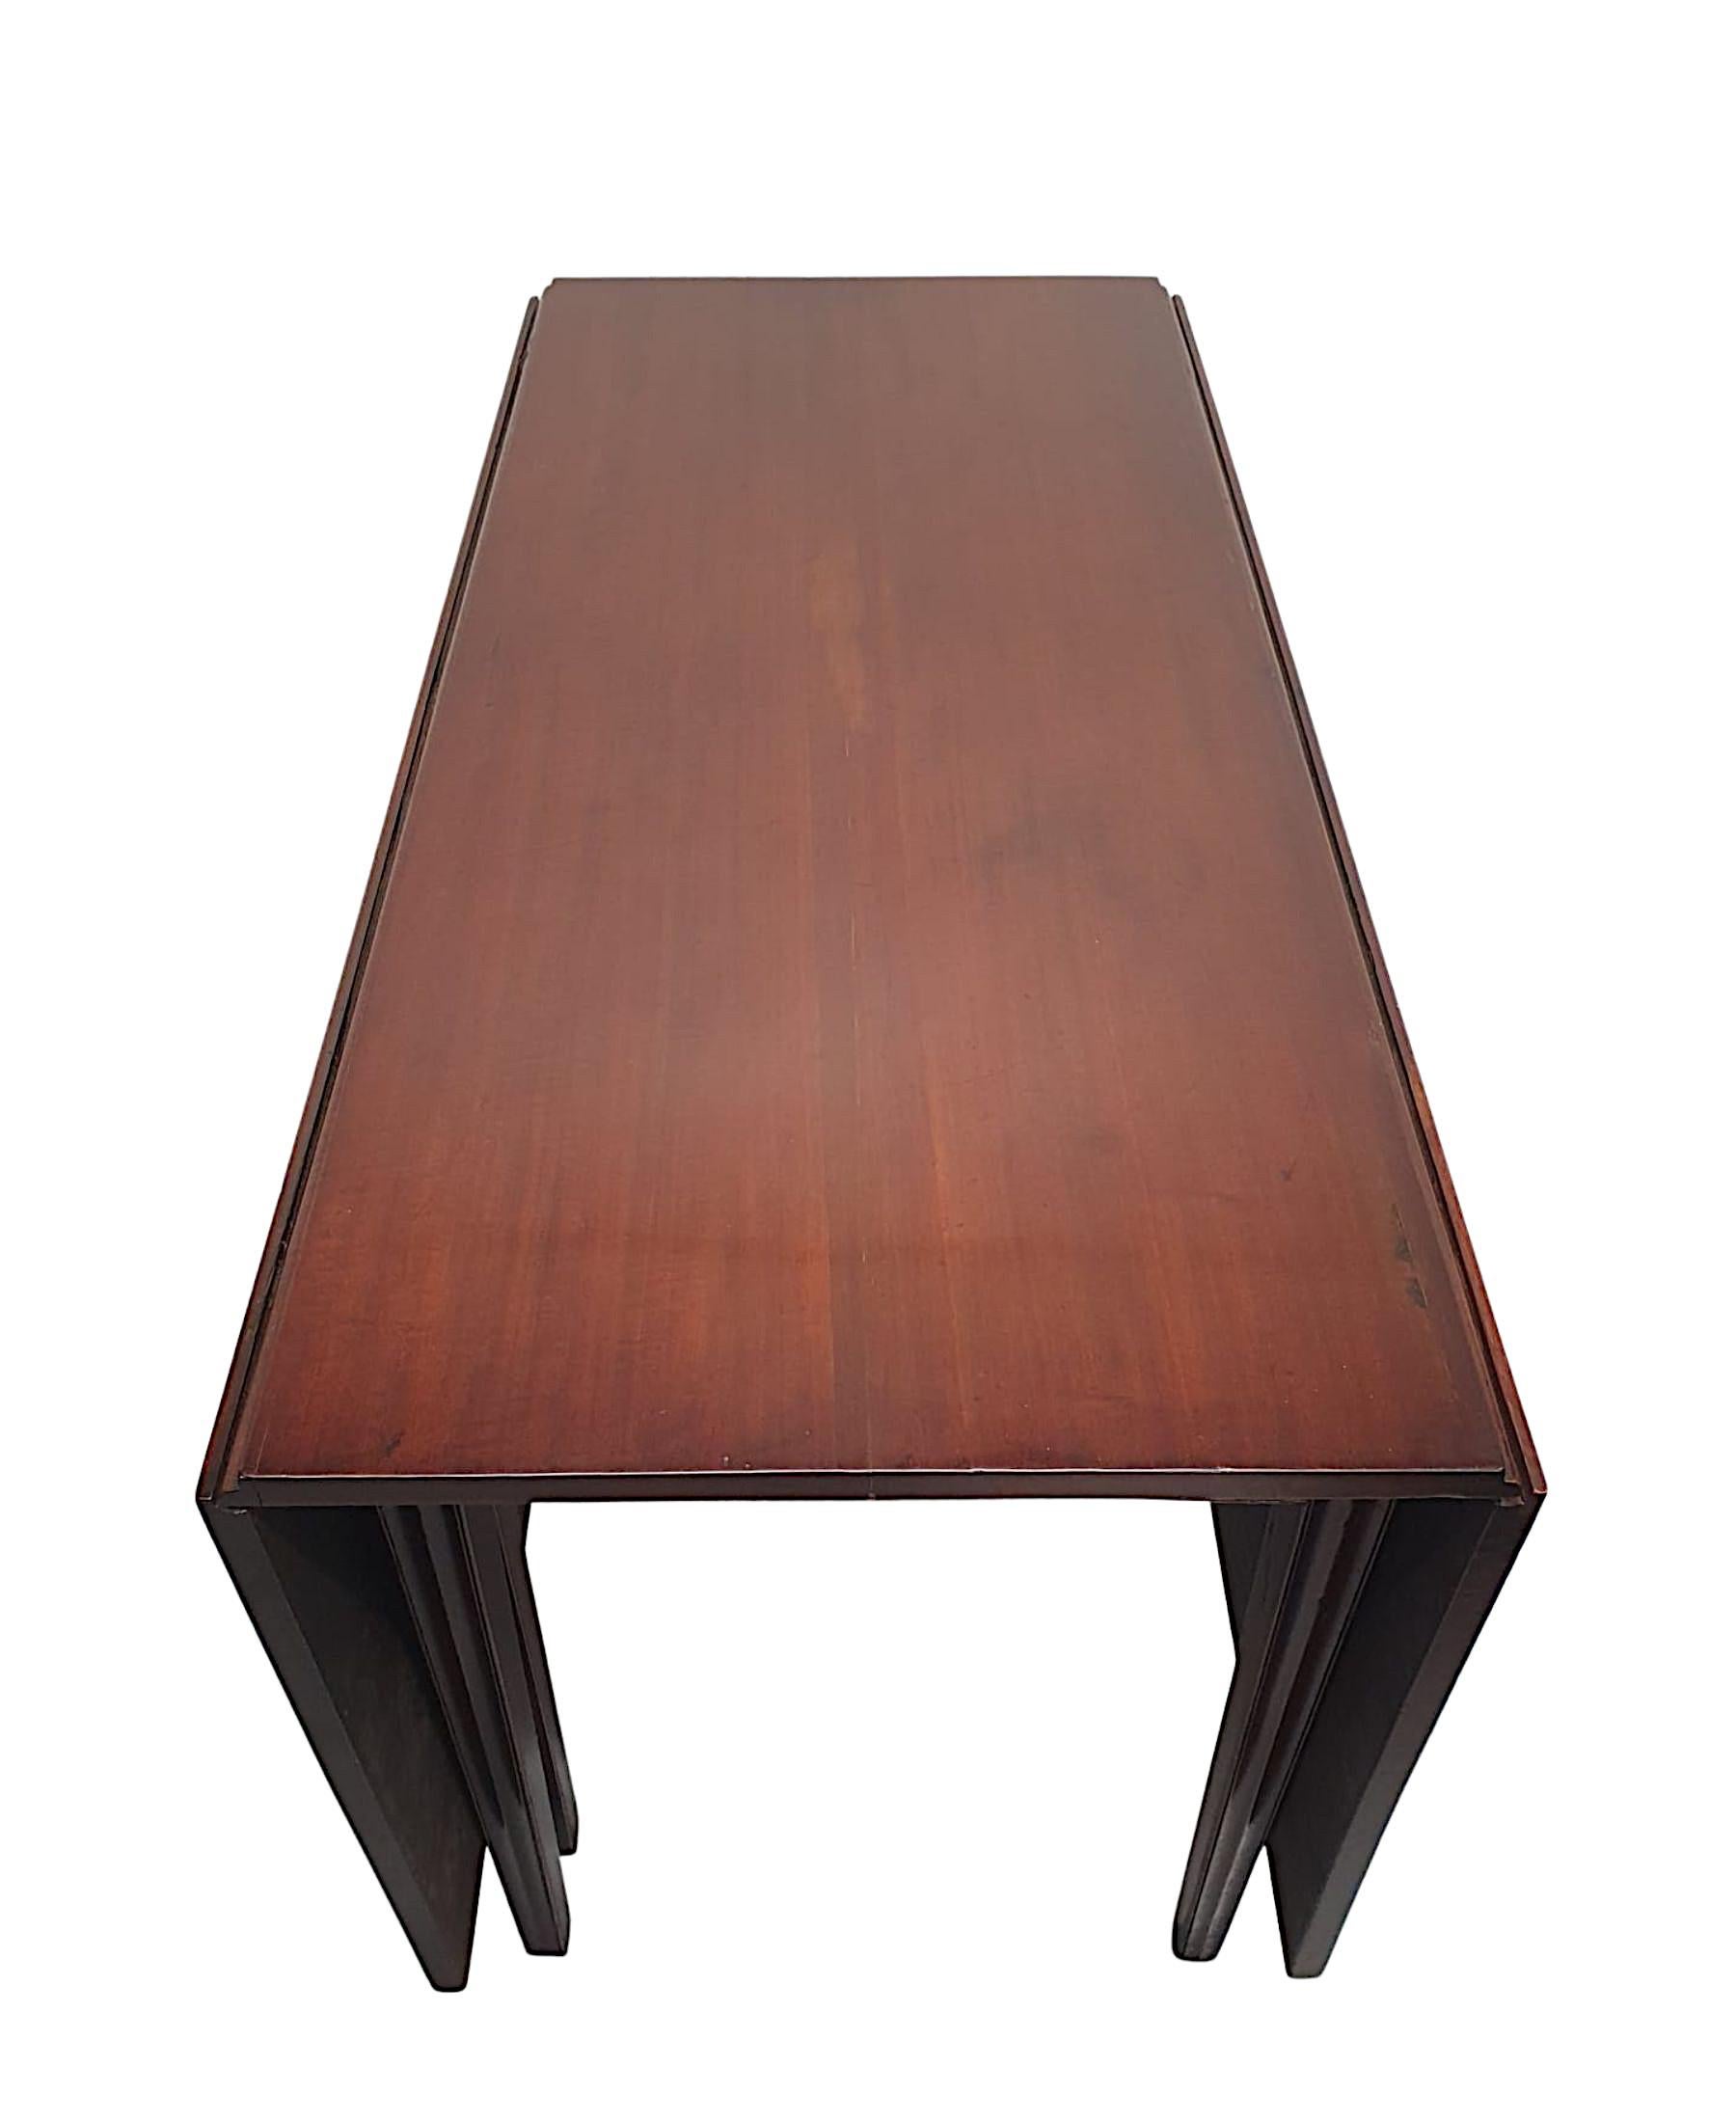  A Very Fine Irish Georgian Mahogany Drop Leaf Dining Table  In Good Condition For Sale In Dublin, IE